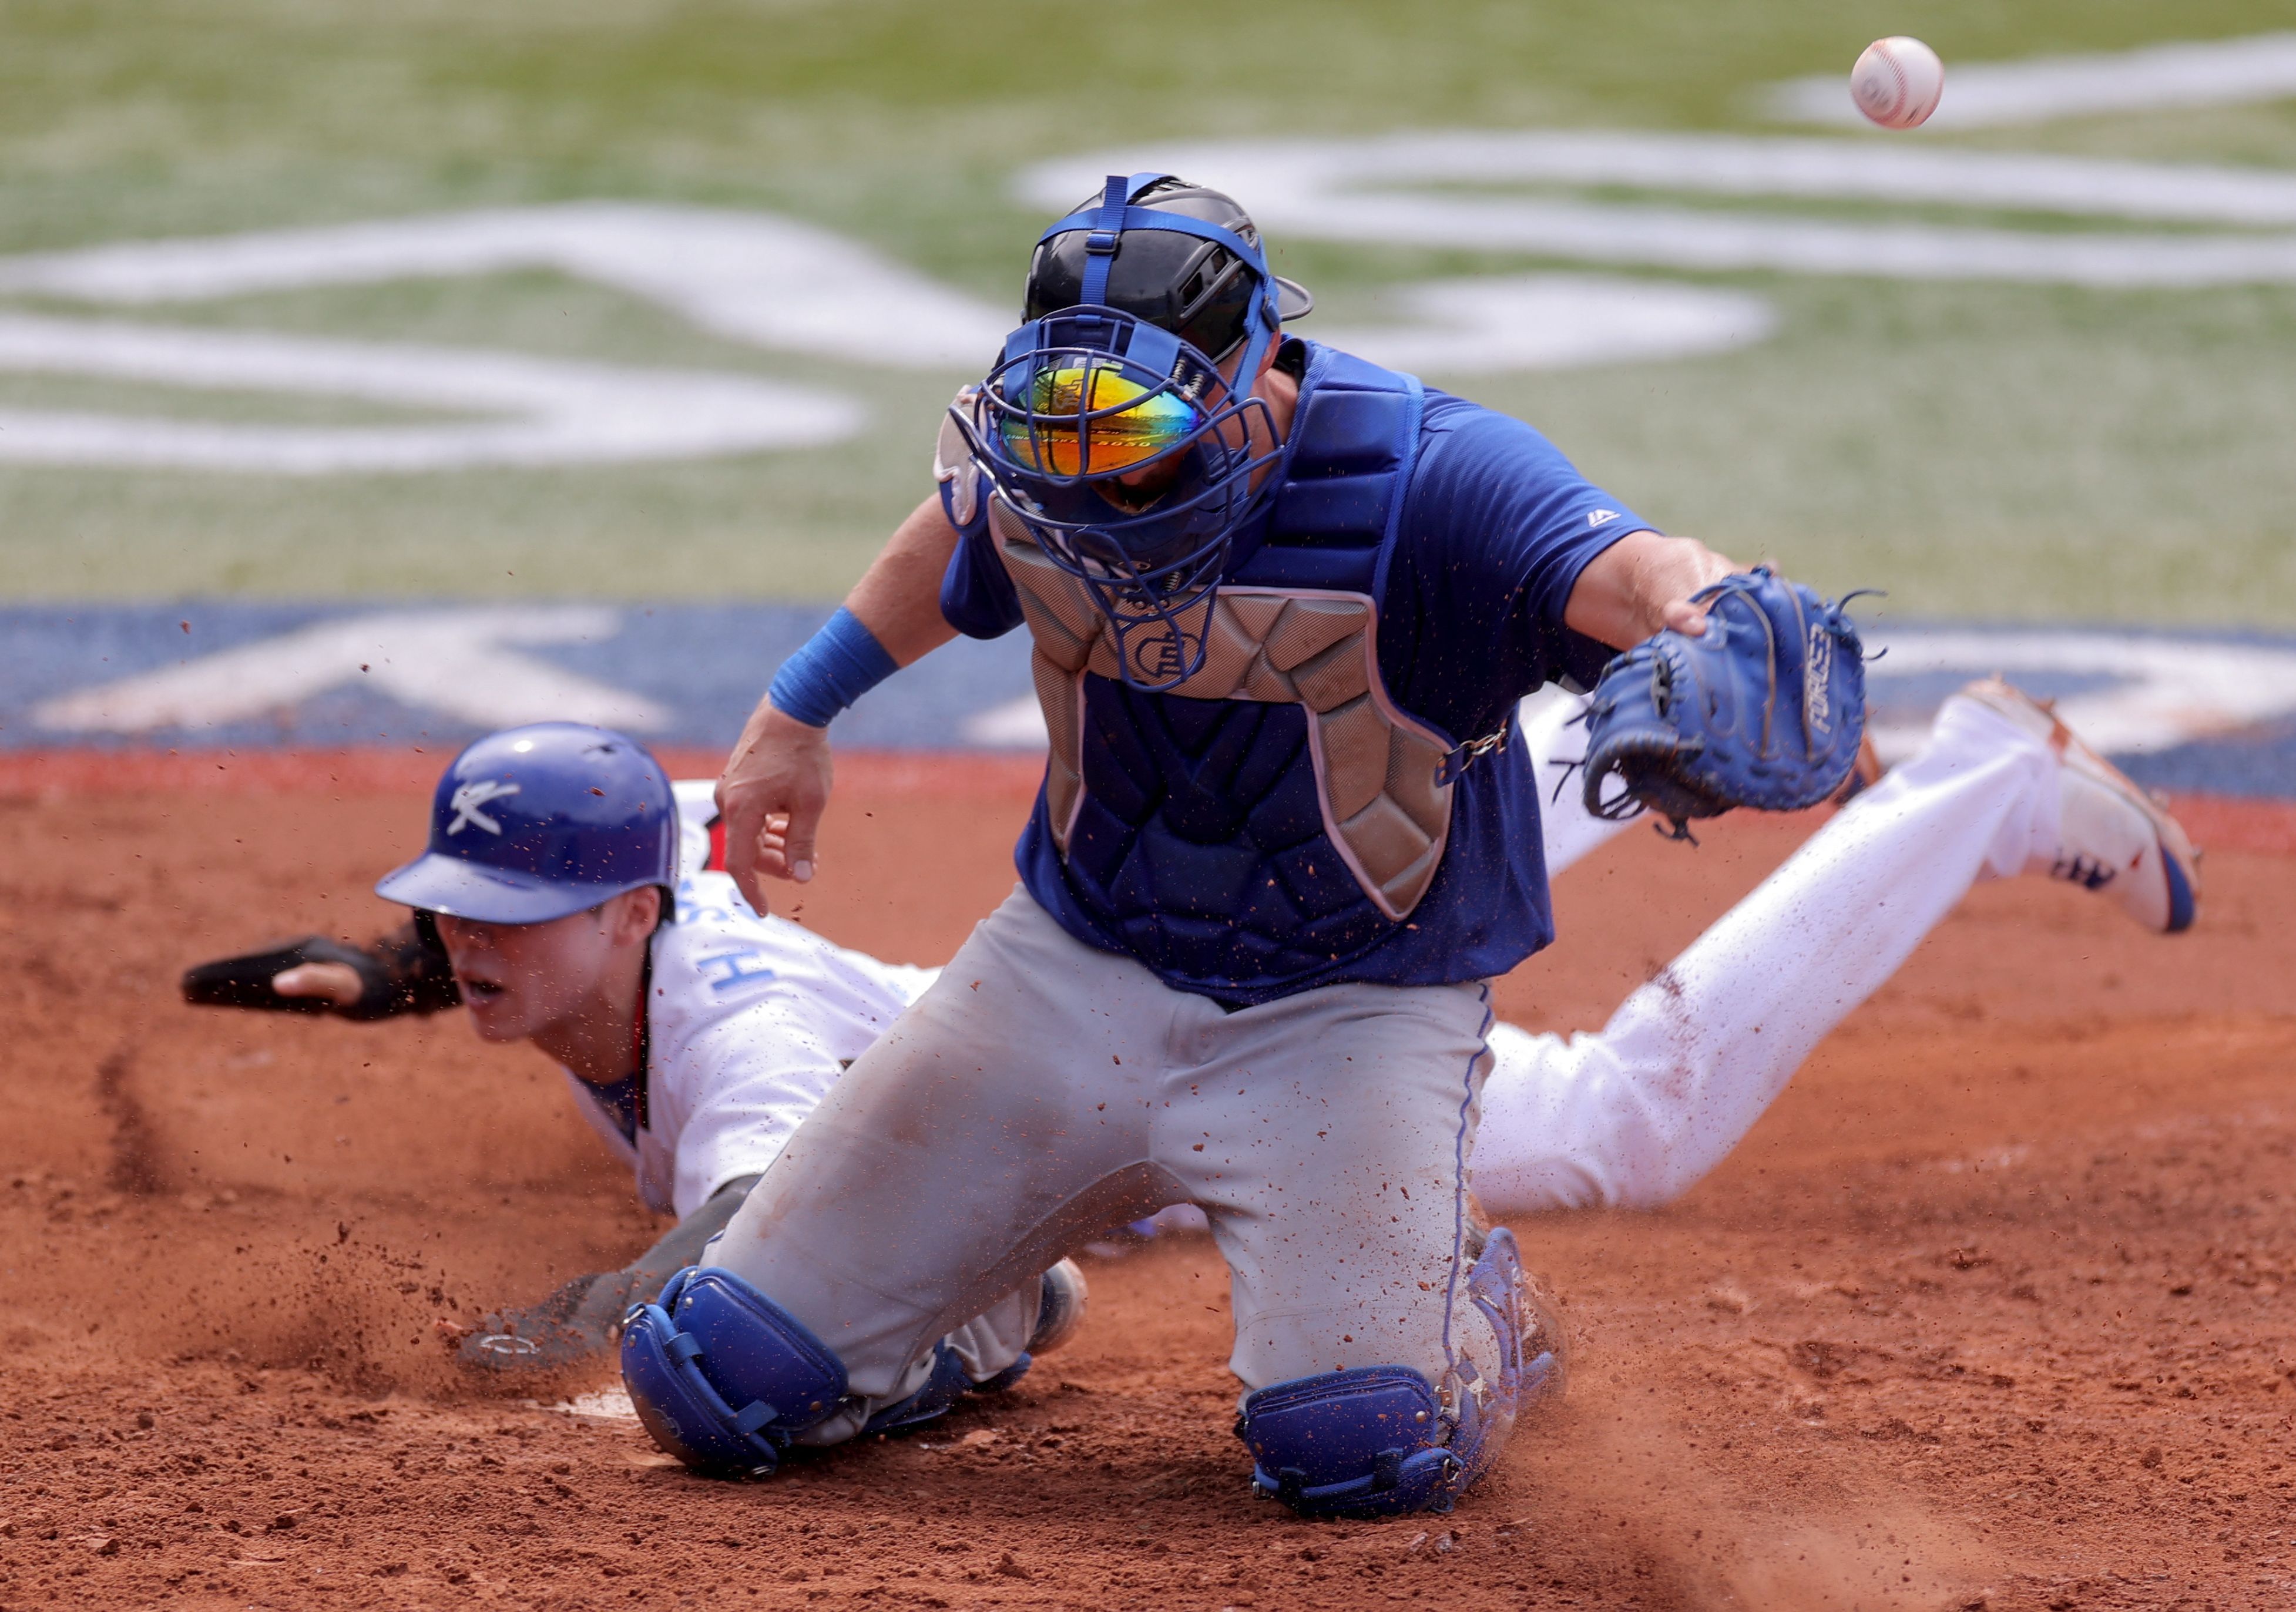  Israel's catcher Ryan Lavarnway (front) fails to catch the ball while South Korea's Kim Hyeseong (rear) at the Tokyo Olympics Aug. 2